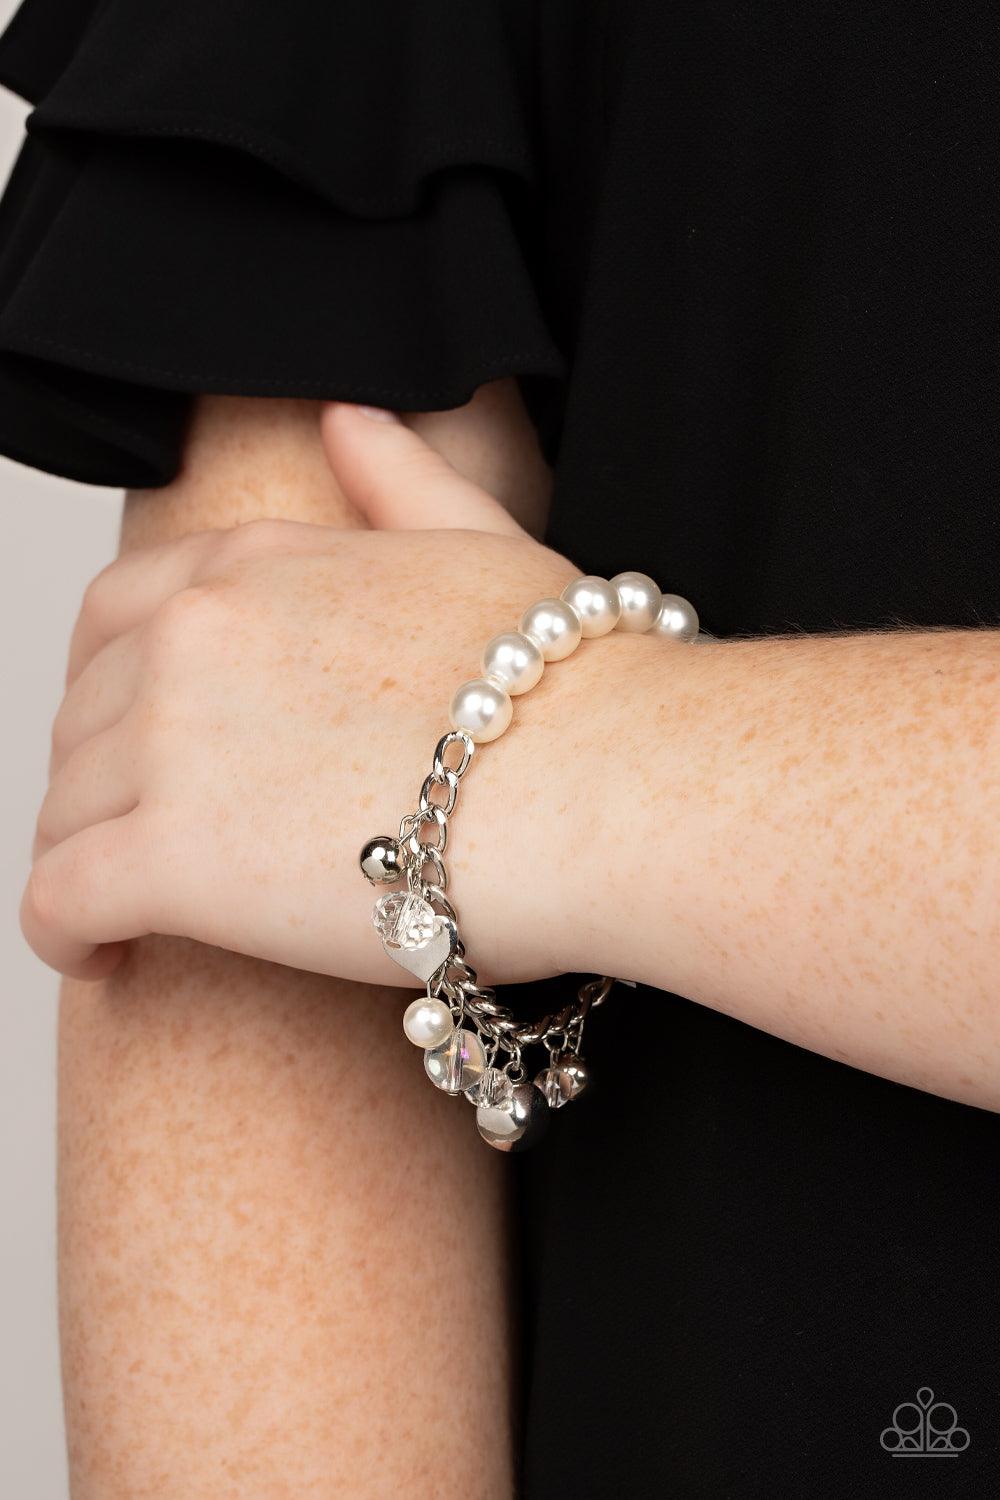 Paparazzi Accessories Adorningly Admirable - White Mismatched silver beads, white pearls, crystal-like accents, gems and heart charms dance from a section of silver chain that attaches to a stretchy band of white pearls around the wrist for a flirtatious